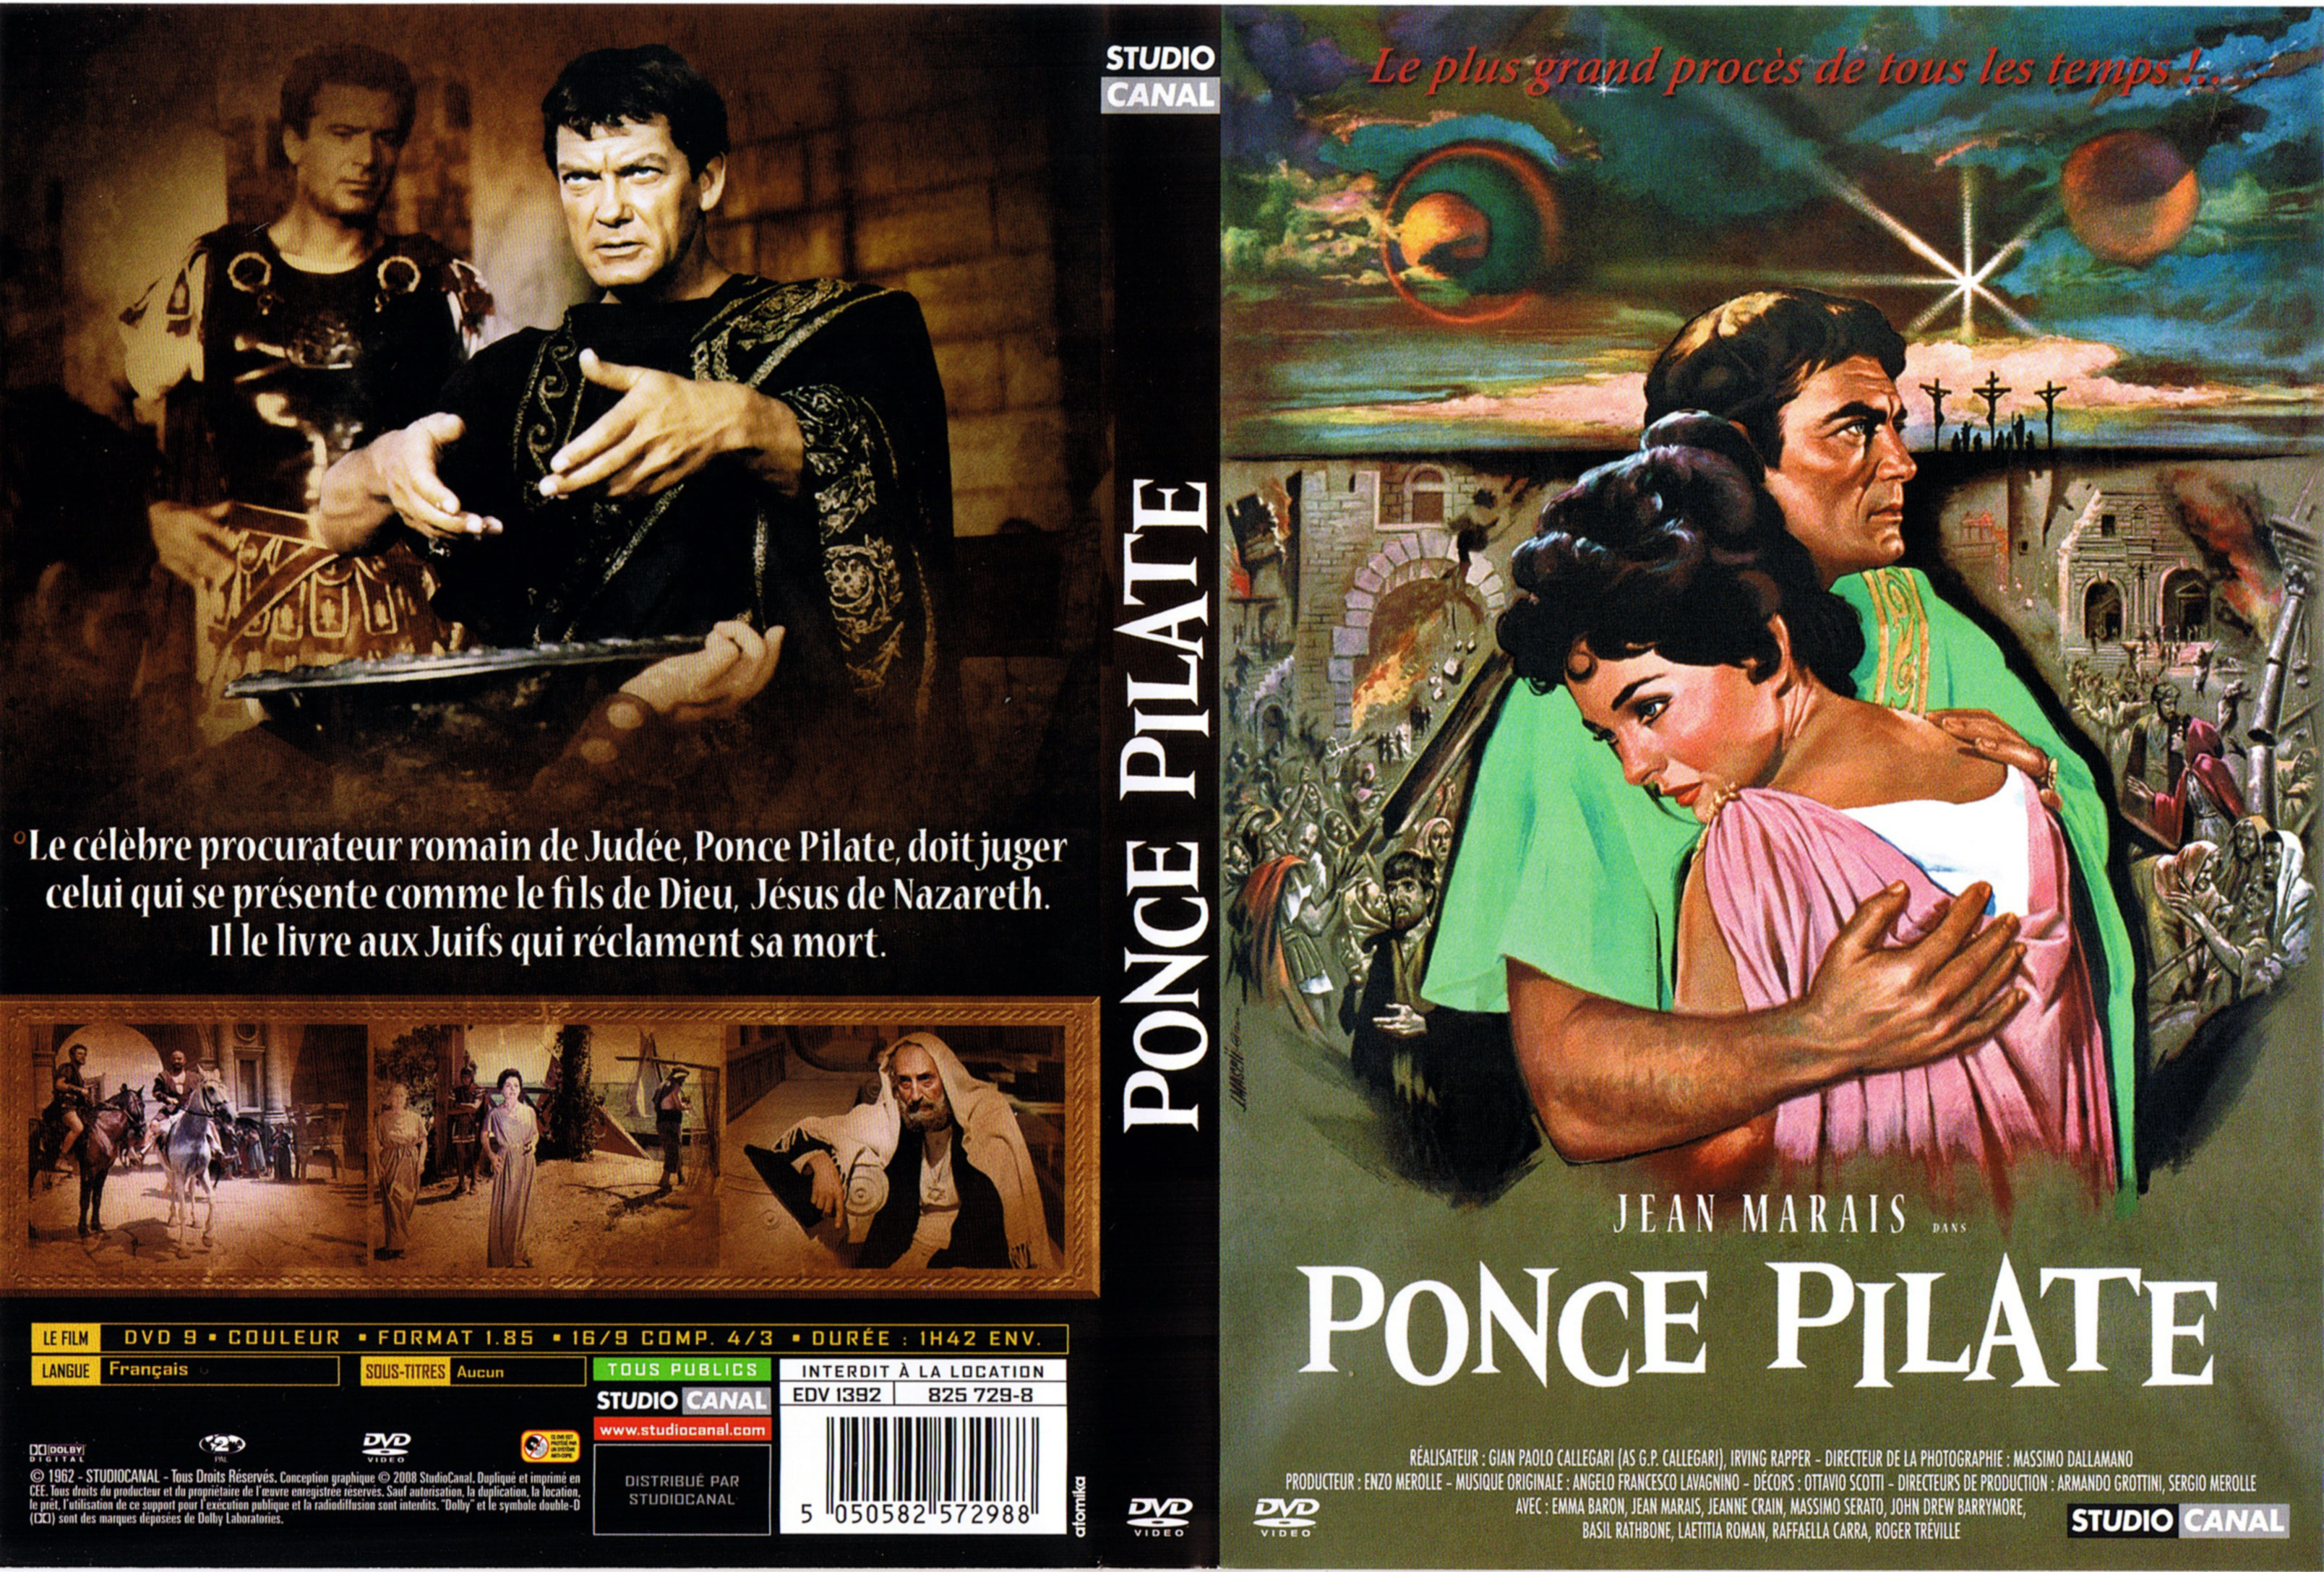 Jaquette DVD Ponce Pilate